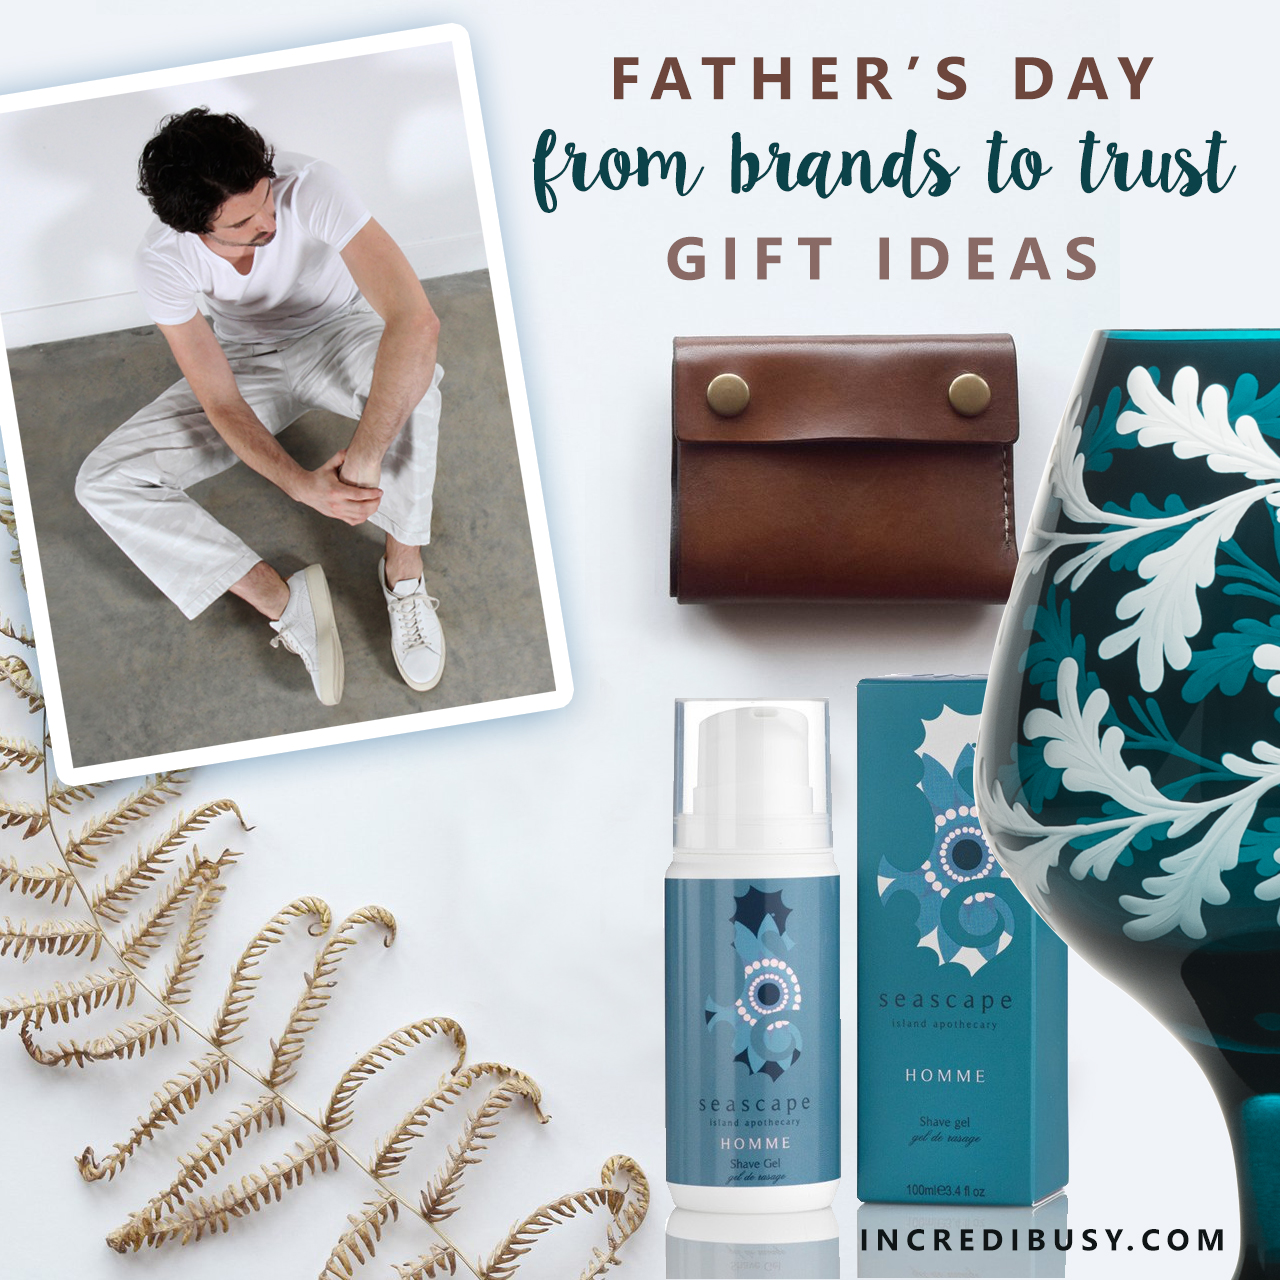 Ethical-Fathers-Day-Gifts-Incredibusy